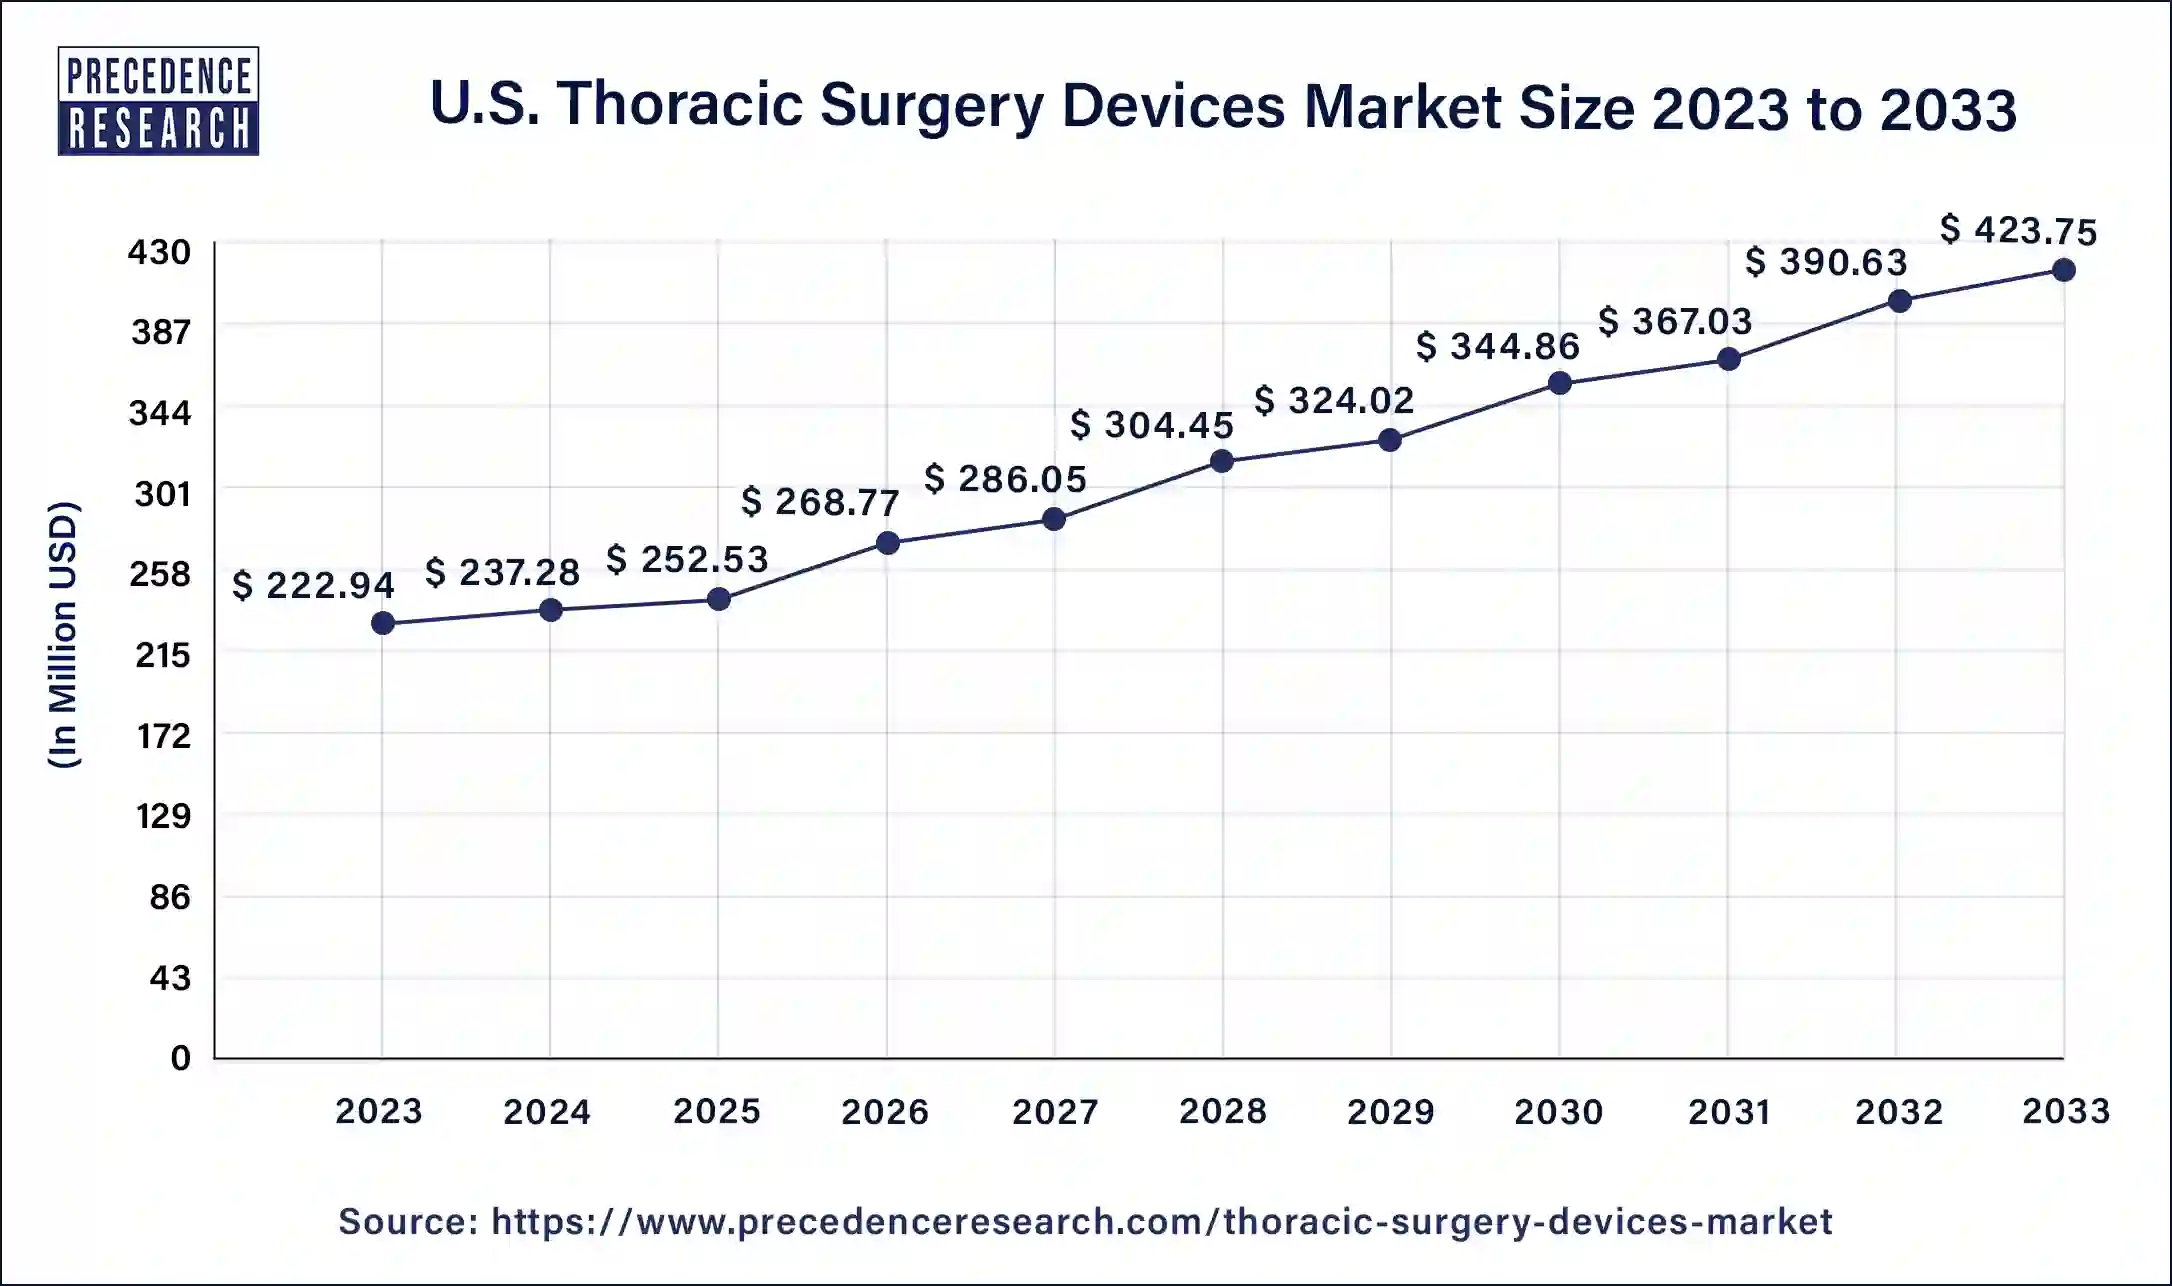 U.S. Thoracic Surgery Devices Market Size 2024 to 2033